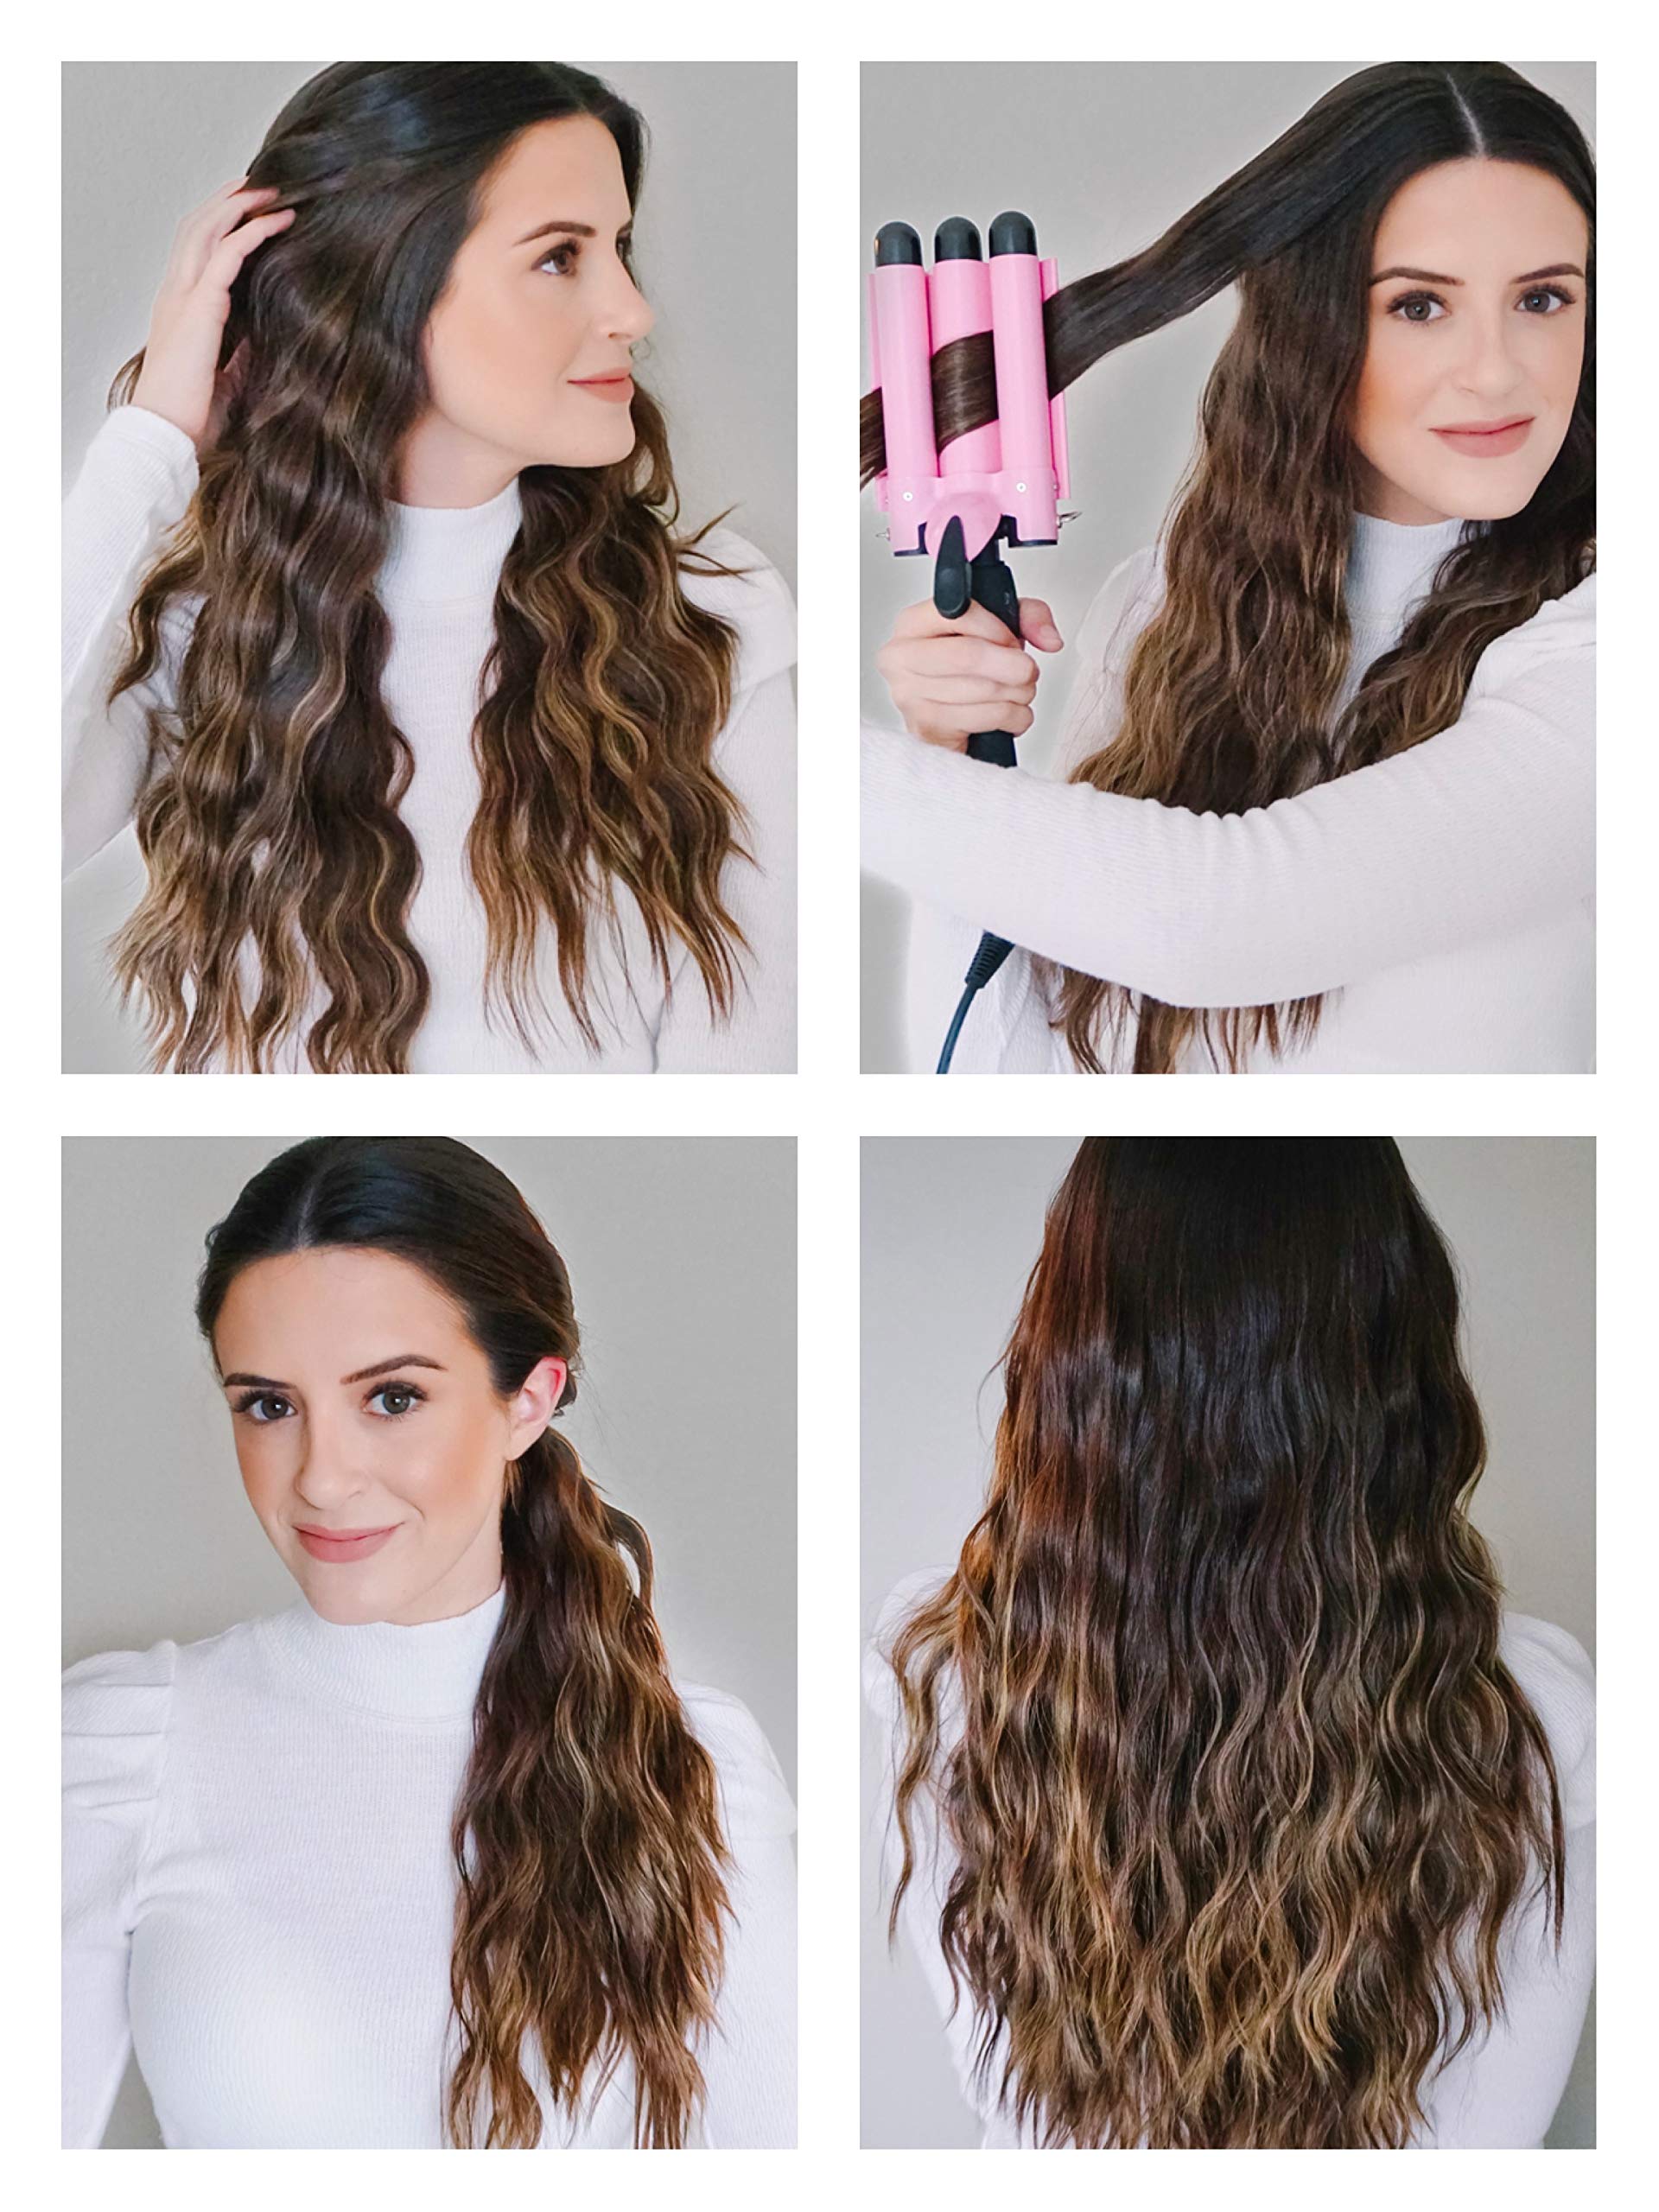 Summer Wave Hair with the Alure 3 barrel curling iron